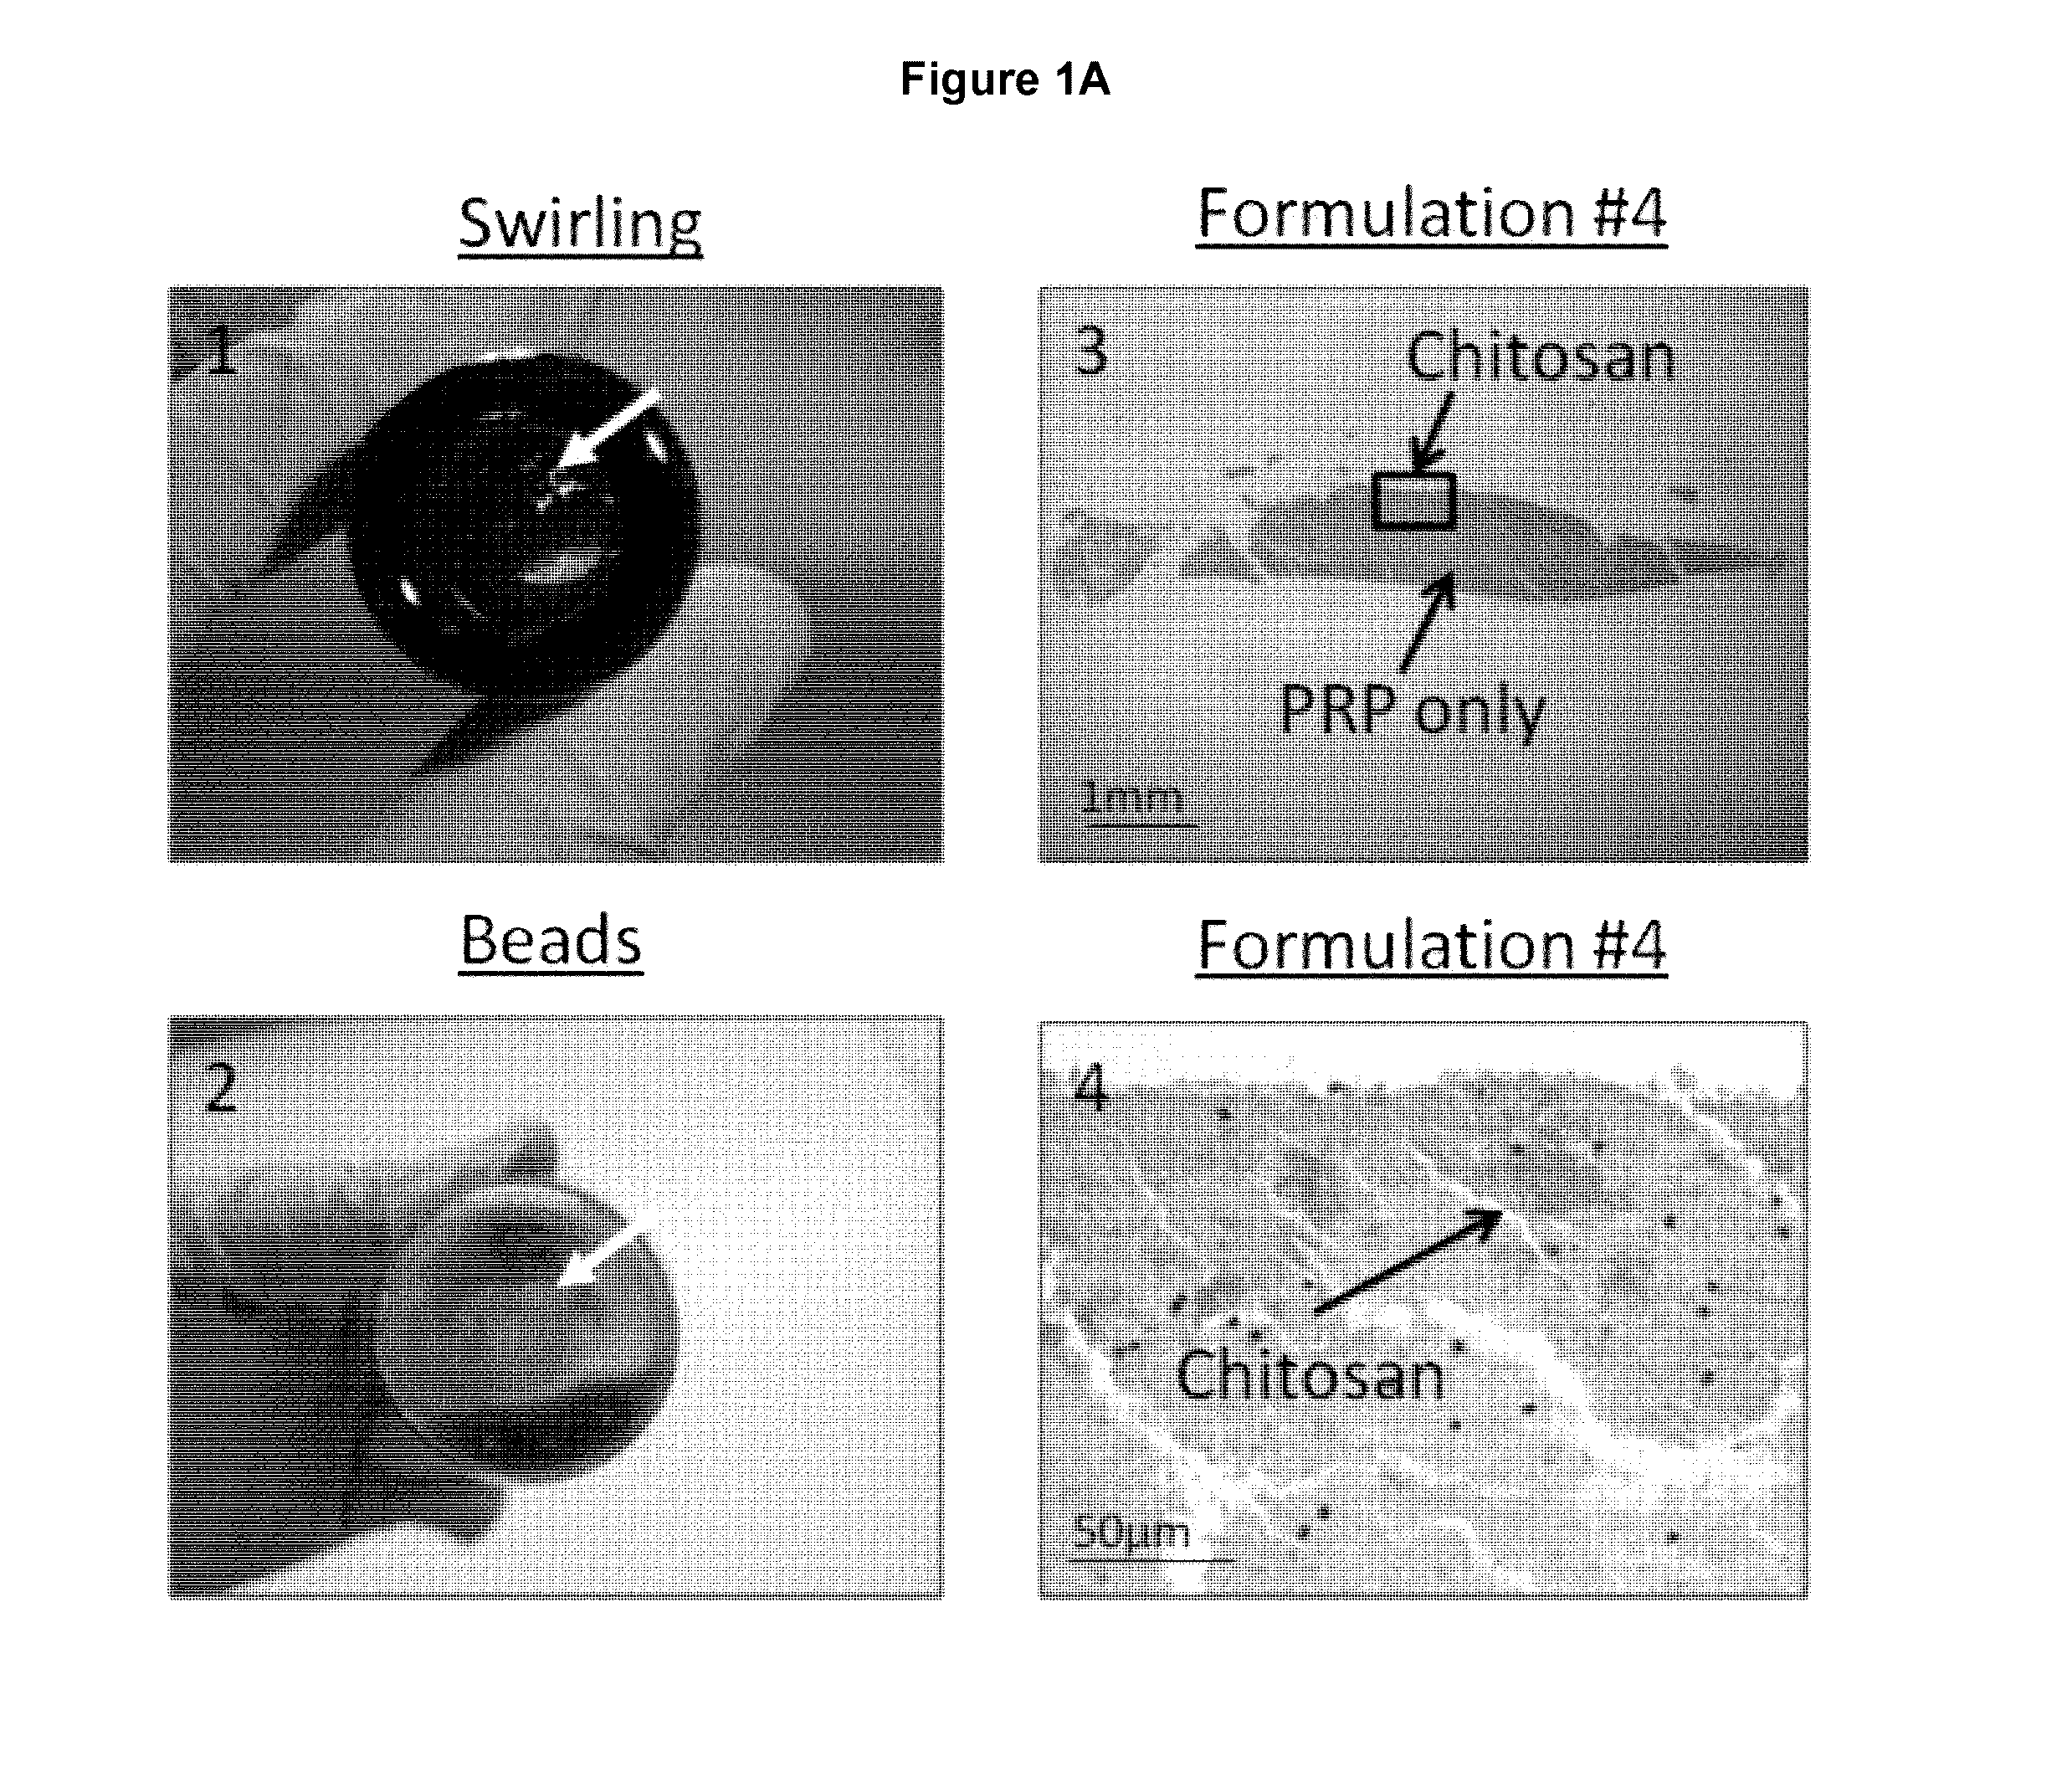 Freeze-dried polymer compositions for mixing with platelet rich plasma to form implants for tissue repair and/or compositions for therapeutic intra-articular injections